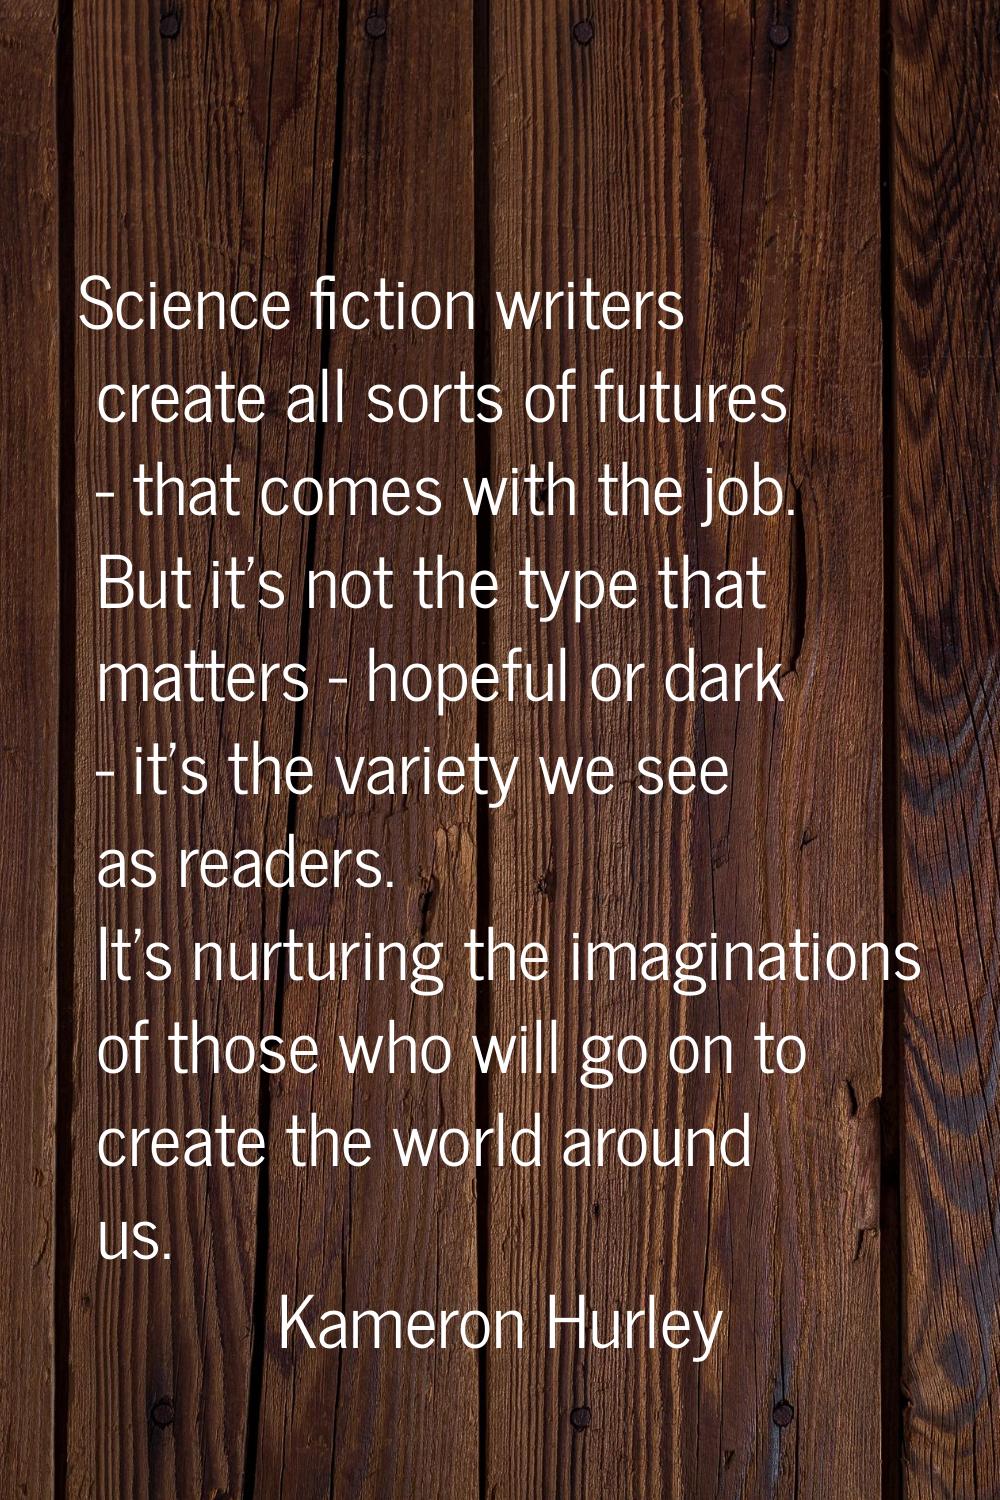 Science fiction writers create all sorts of futures - that comes with the job. But it's not the typ